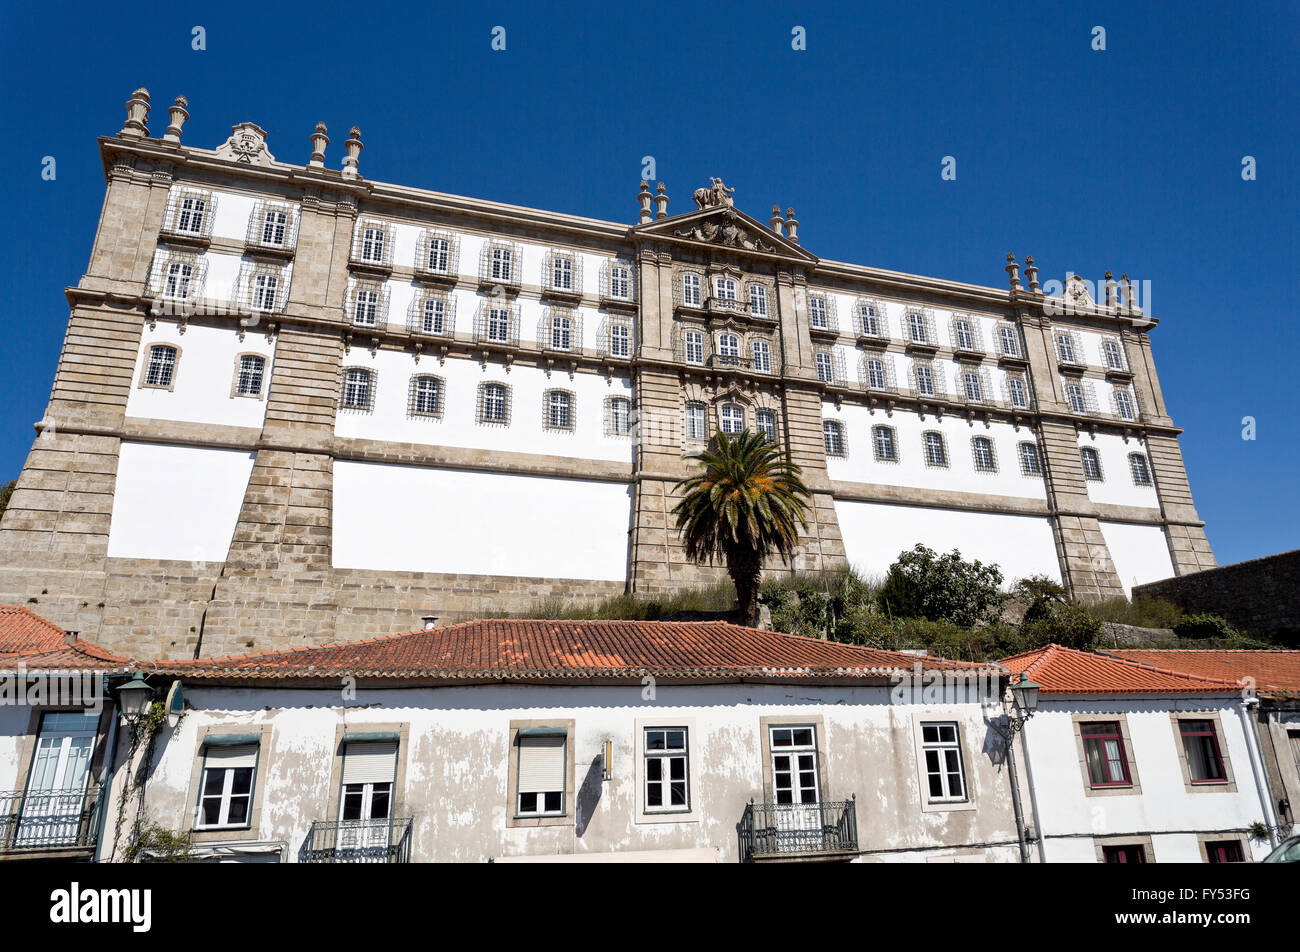 View of the Monastery of Santa Clara, built in neoclassical style in 1777 in Vila do Conde, Portugal Stock Photo